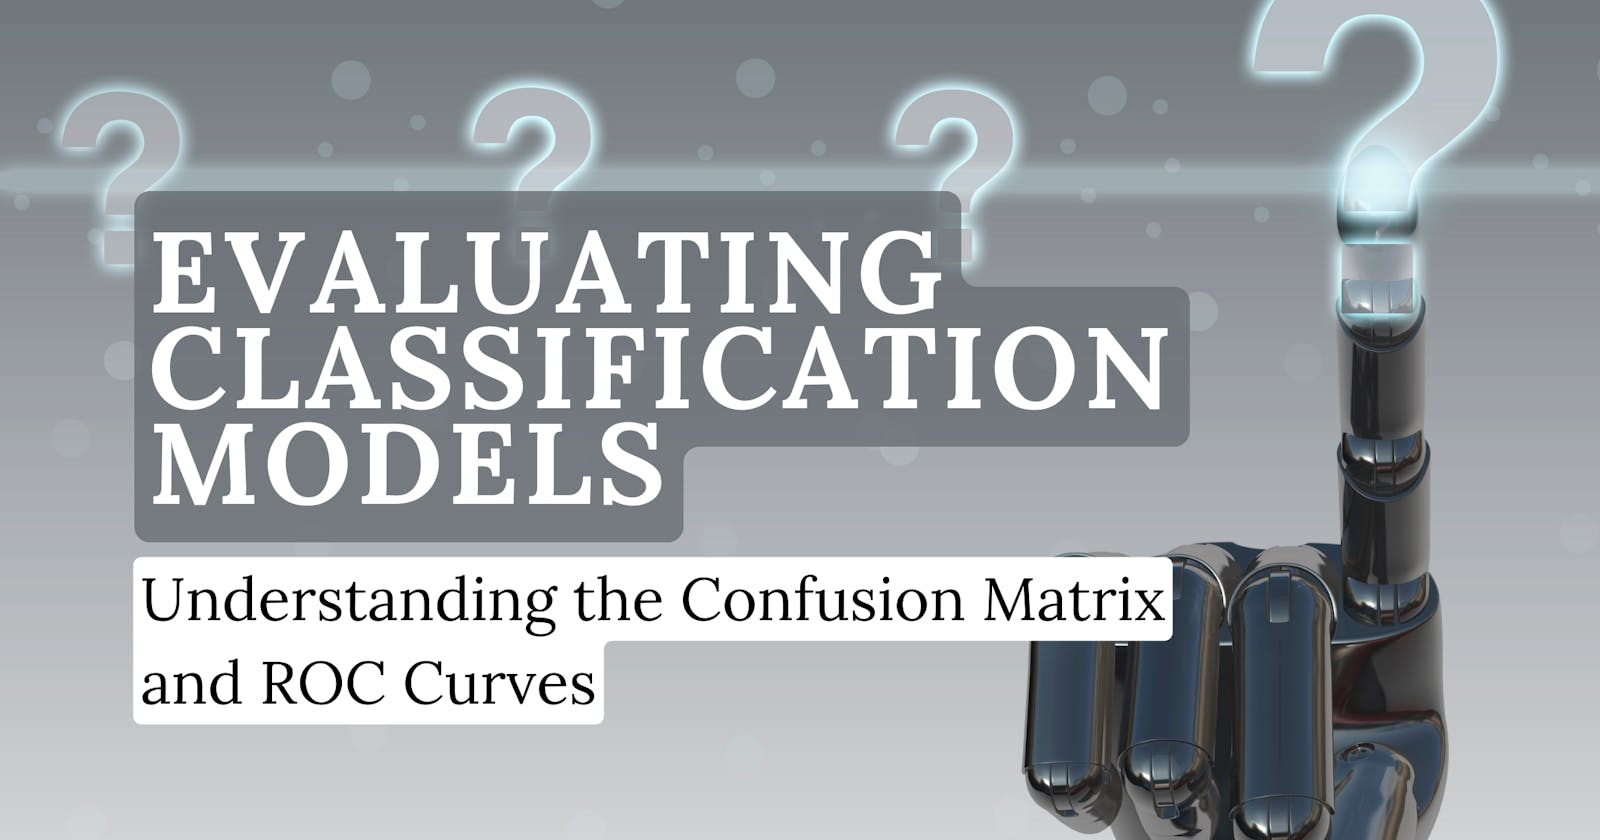 Evaluating Classification Models: Understanding the Confusion Matrix and ROC Curves